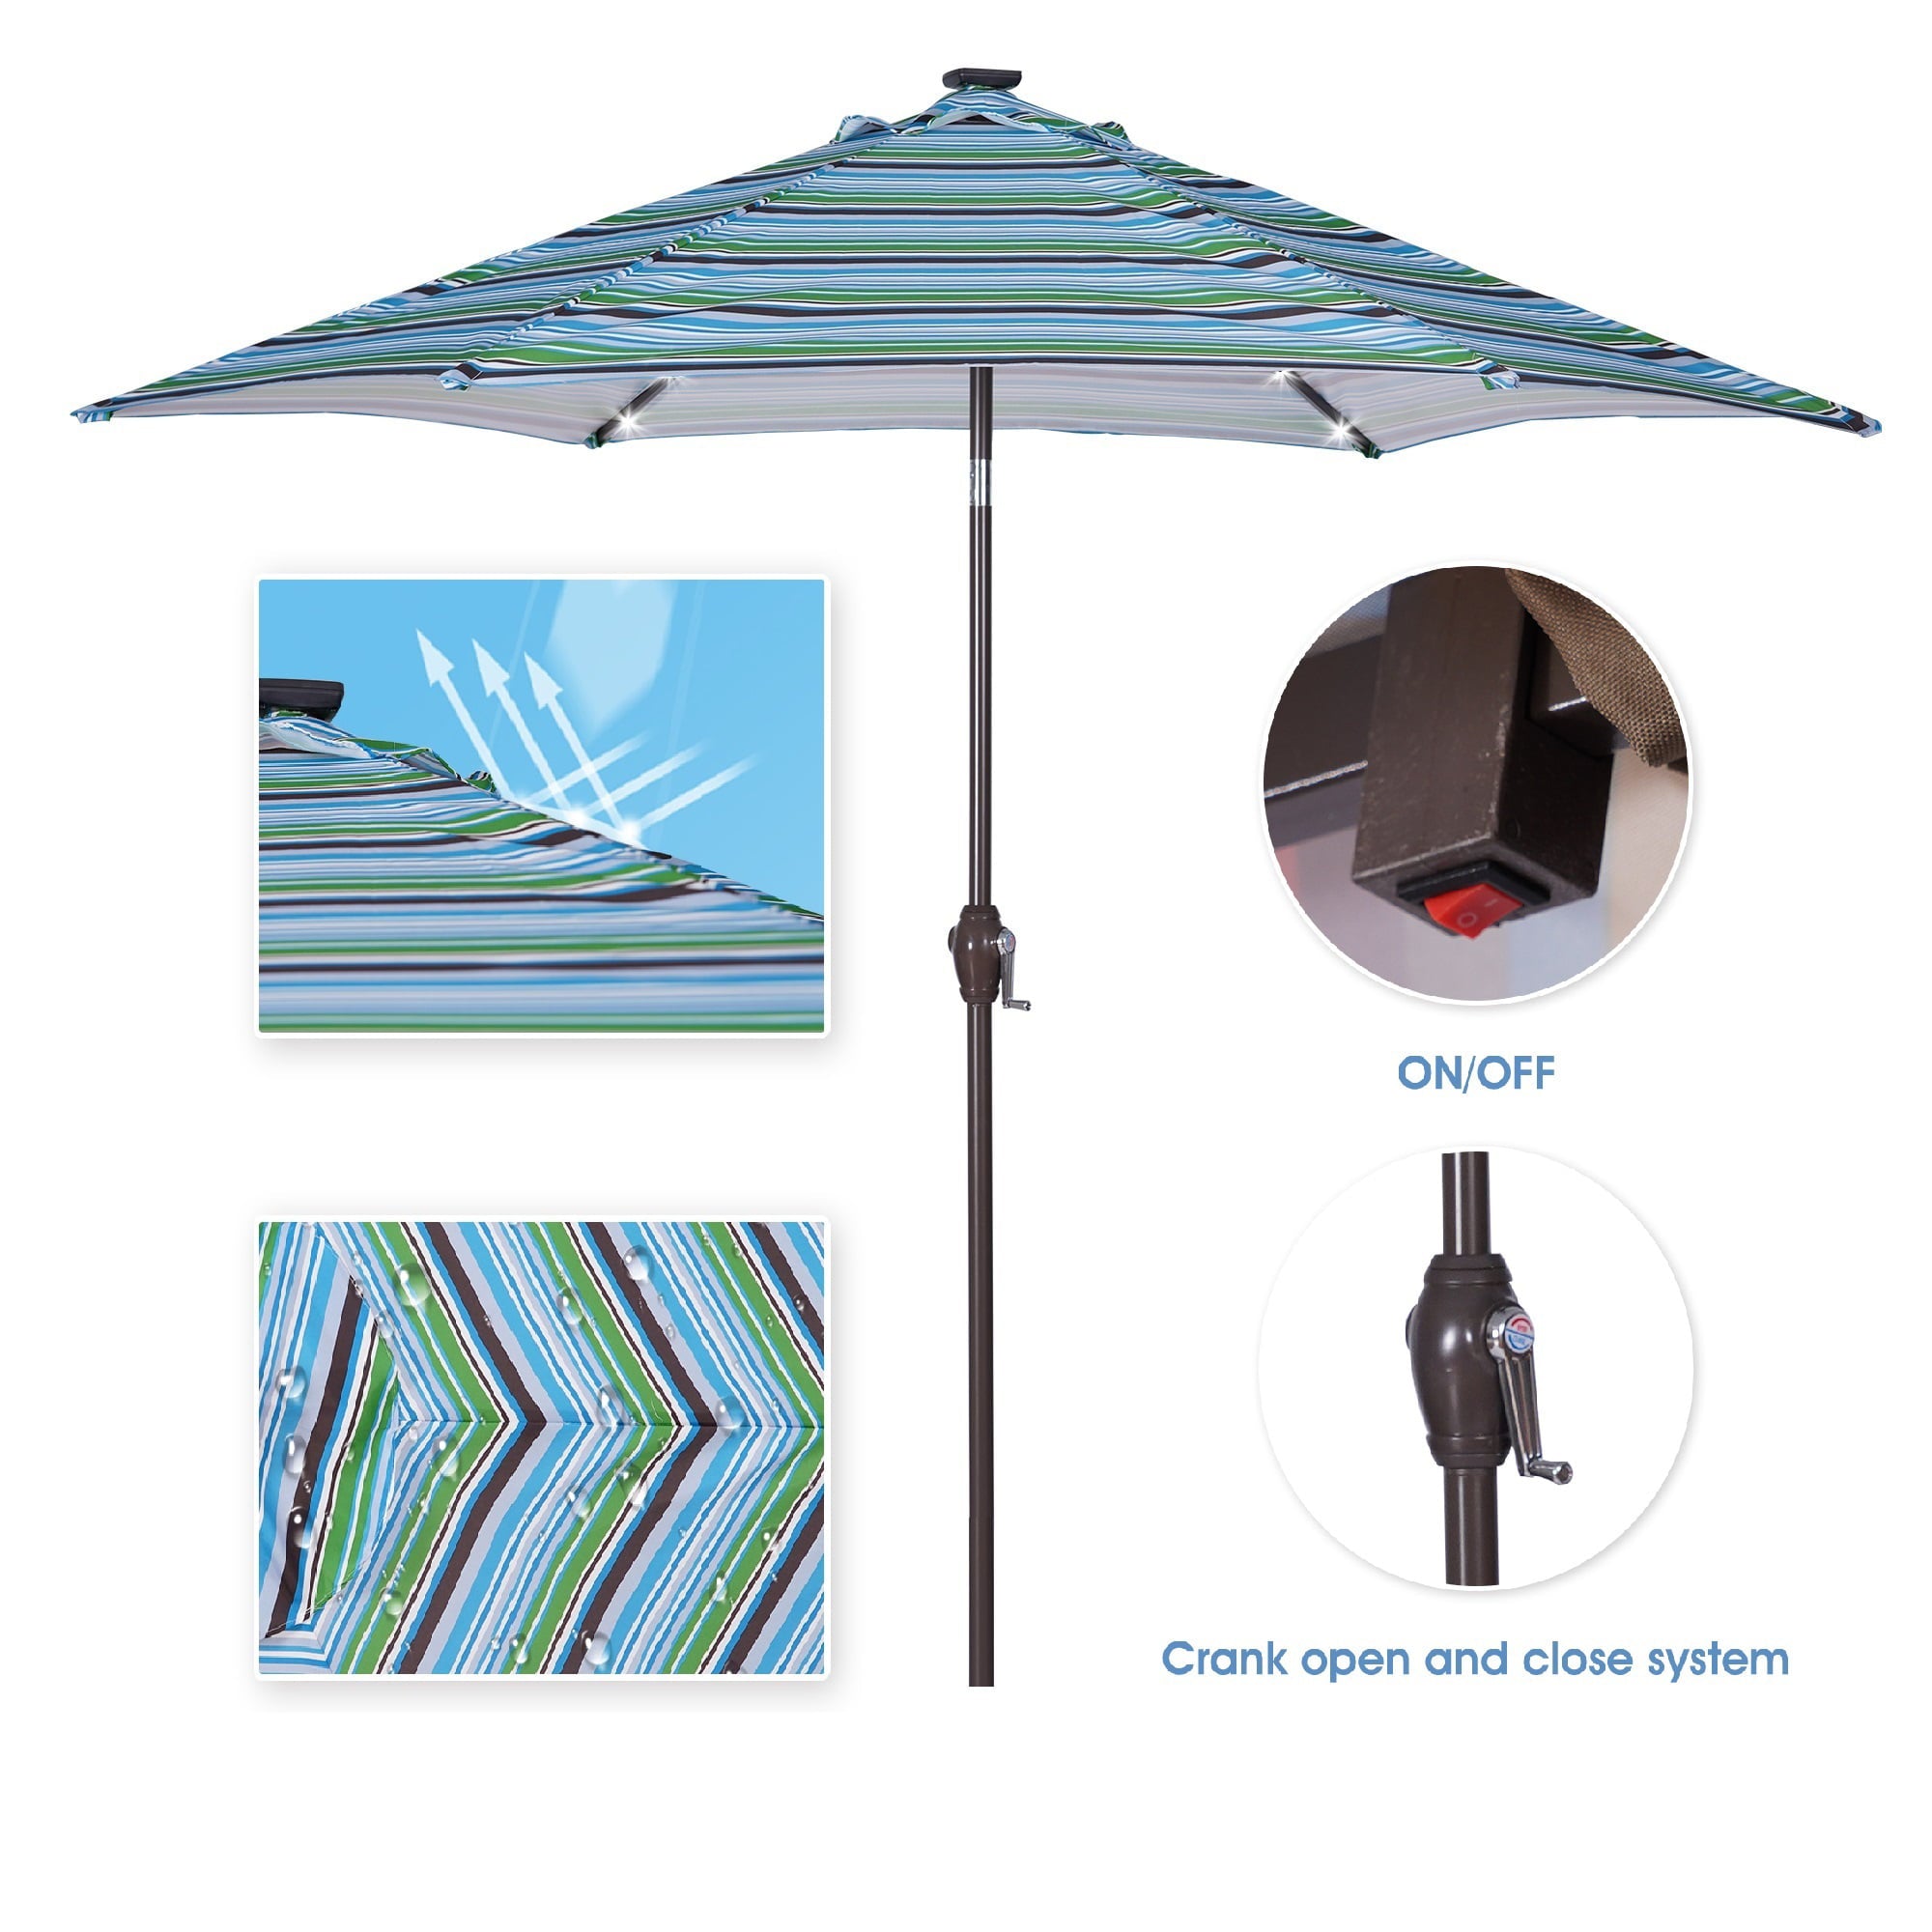 Andoer Outdoor Patio 8.7-Feet Market Table Umbrella with Push Button Tilt and Crank, Blue Stripes With 24 [Umbrella Base is not Included]